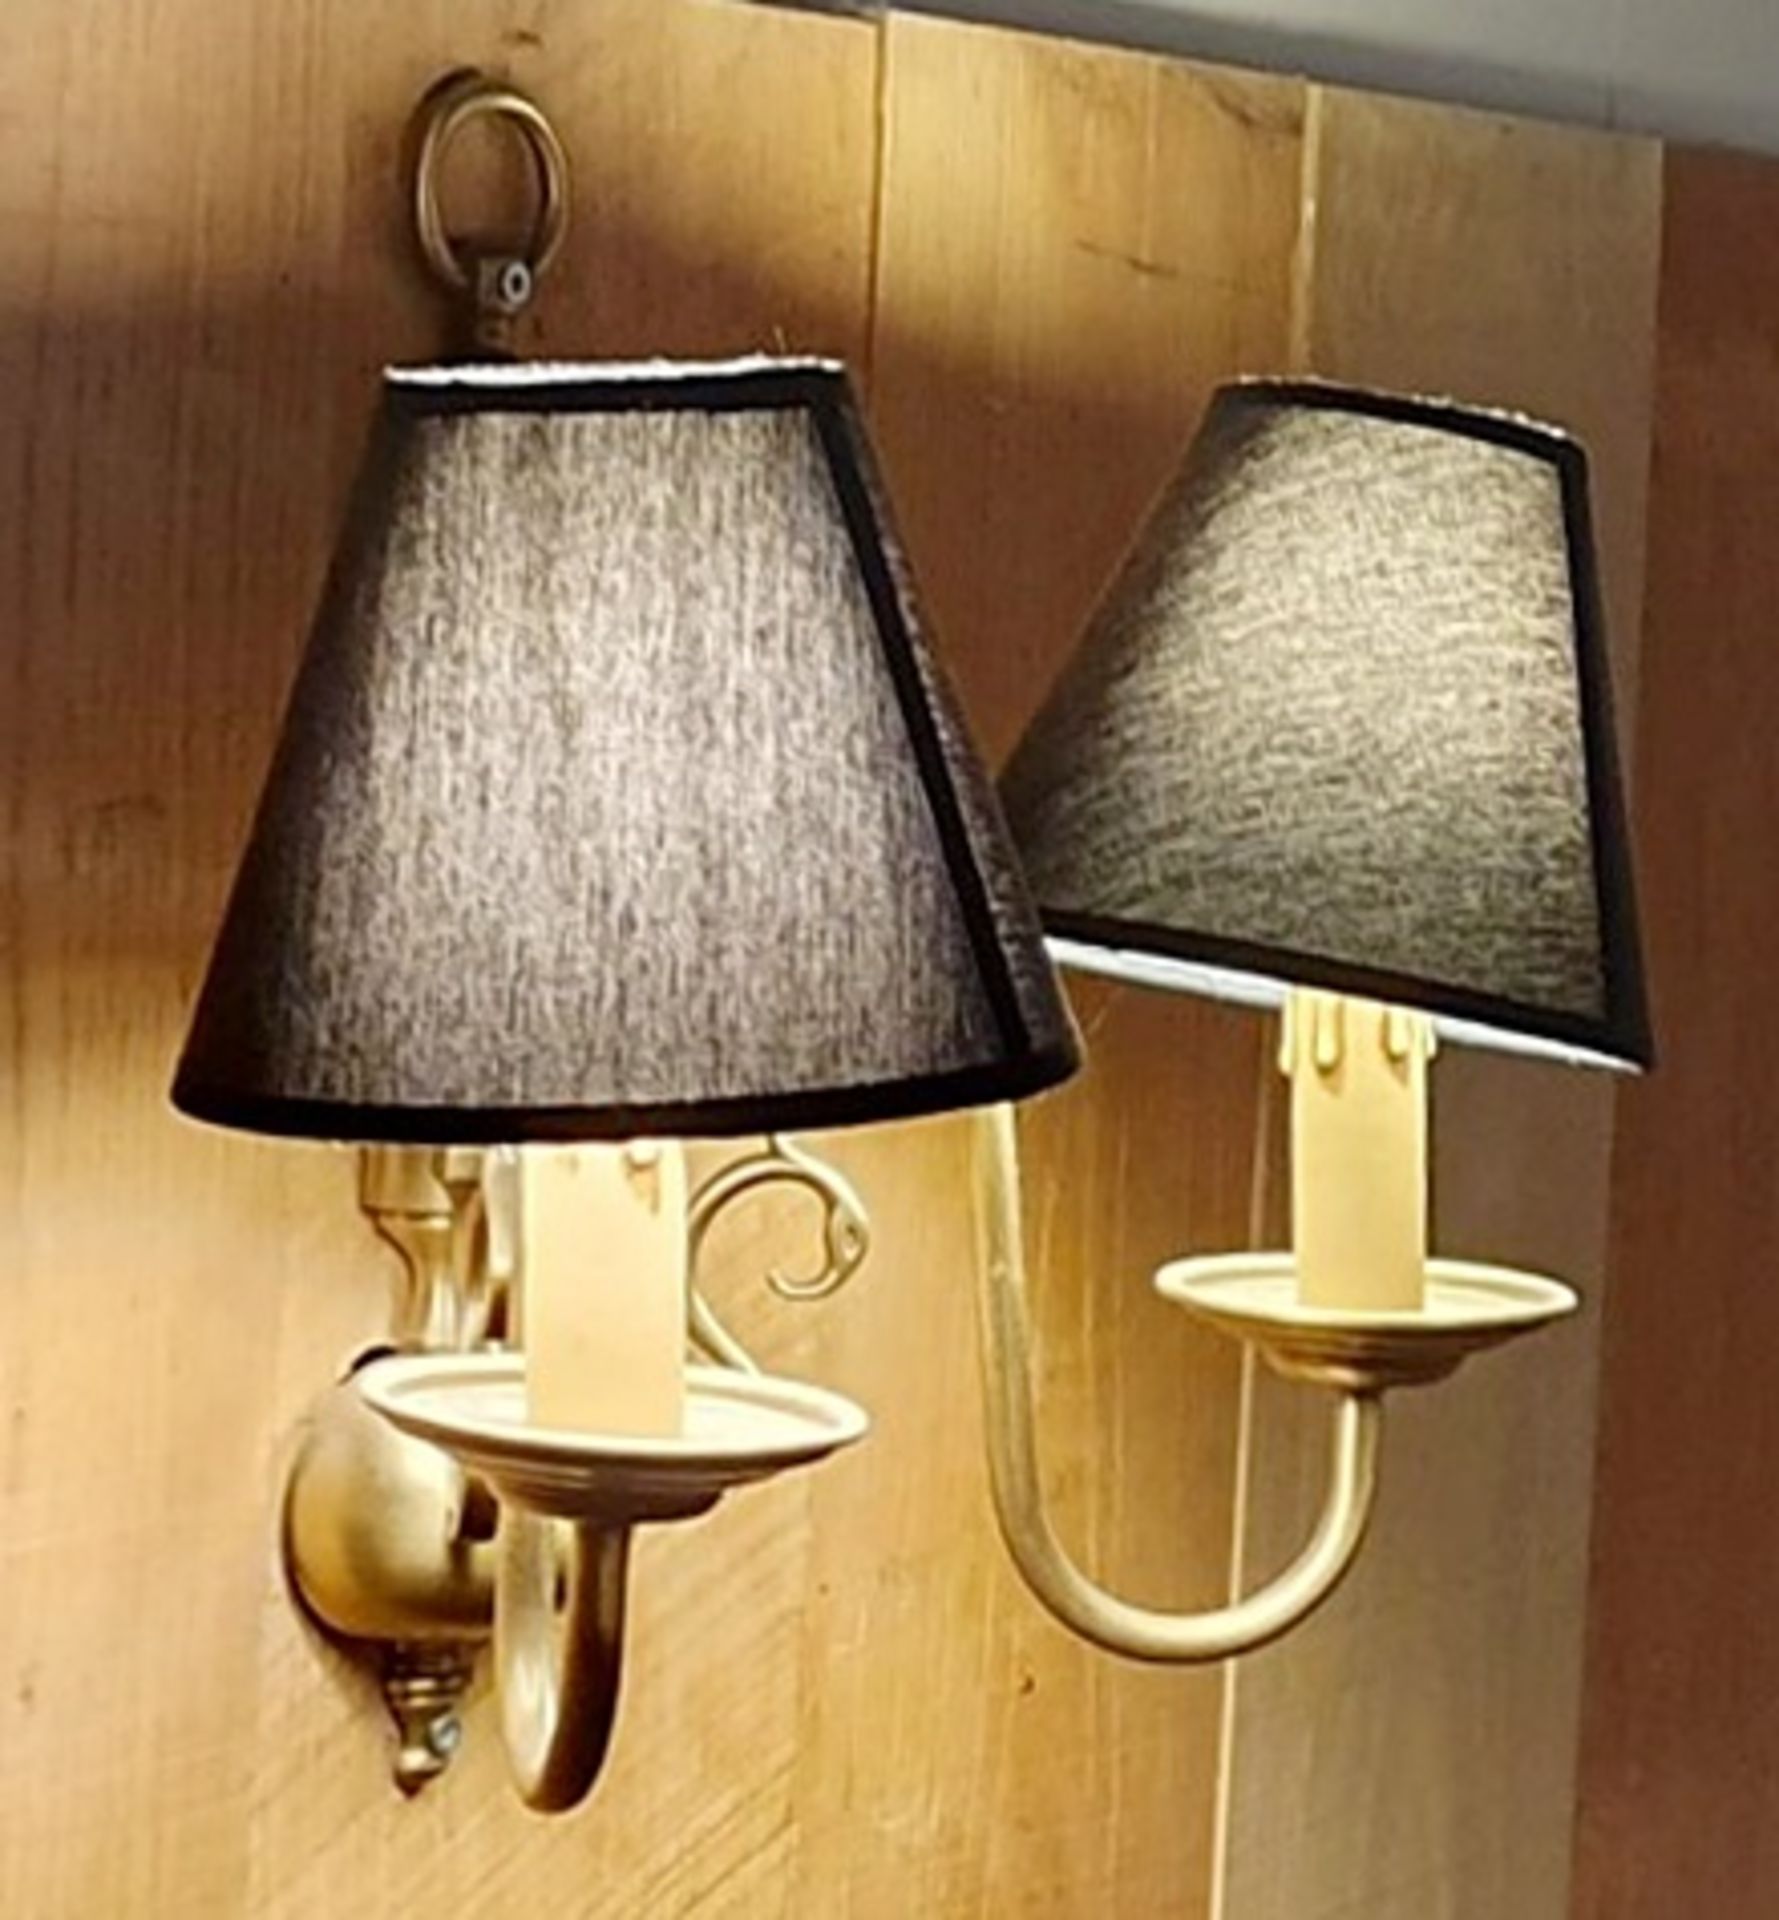 3 x Candle Style Wall Sconce Lights With Shaders - H34 x W37 x D20 cms Ref PA148 - CL463 - Location: